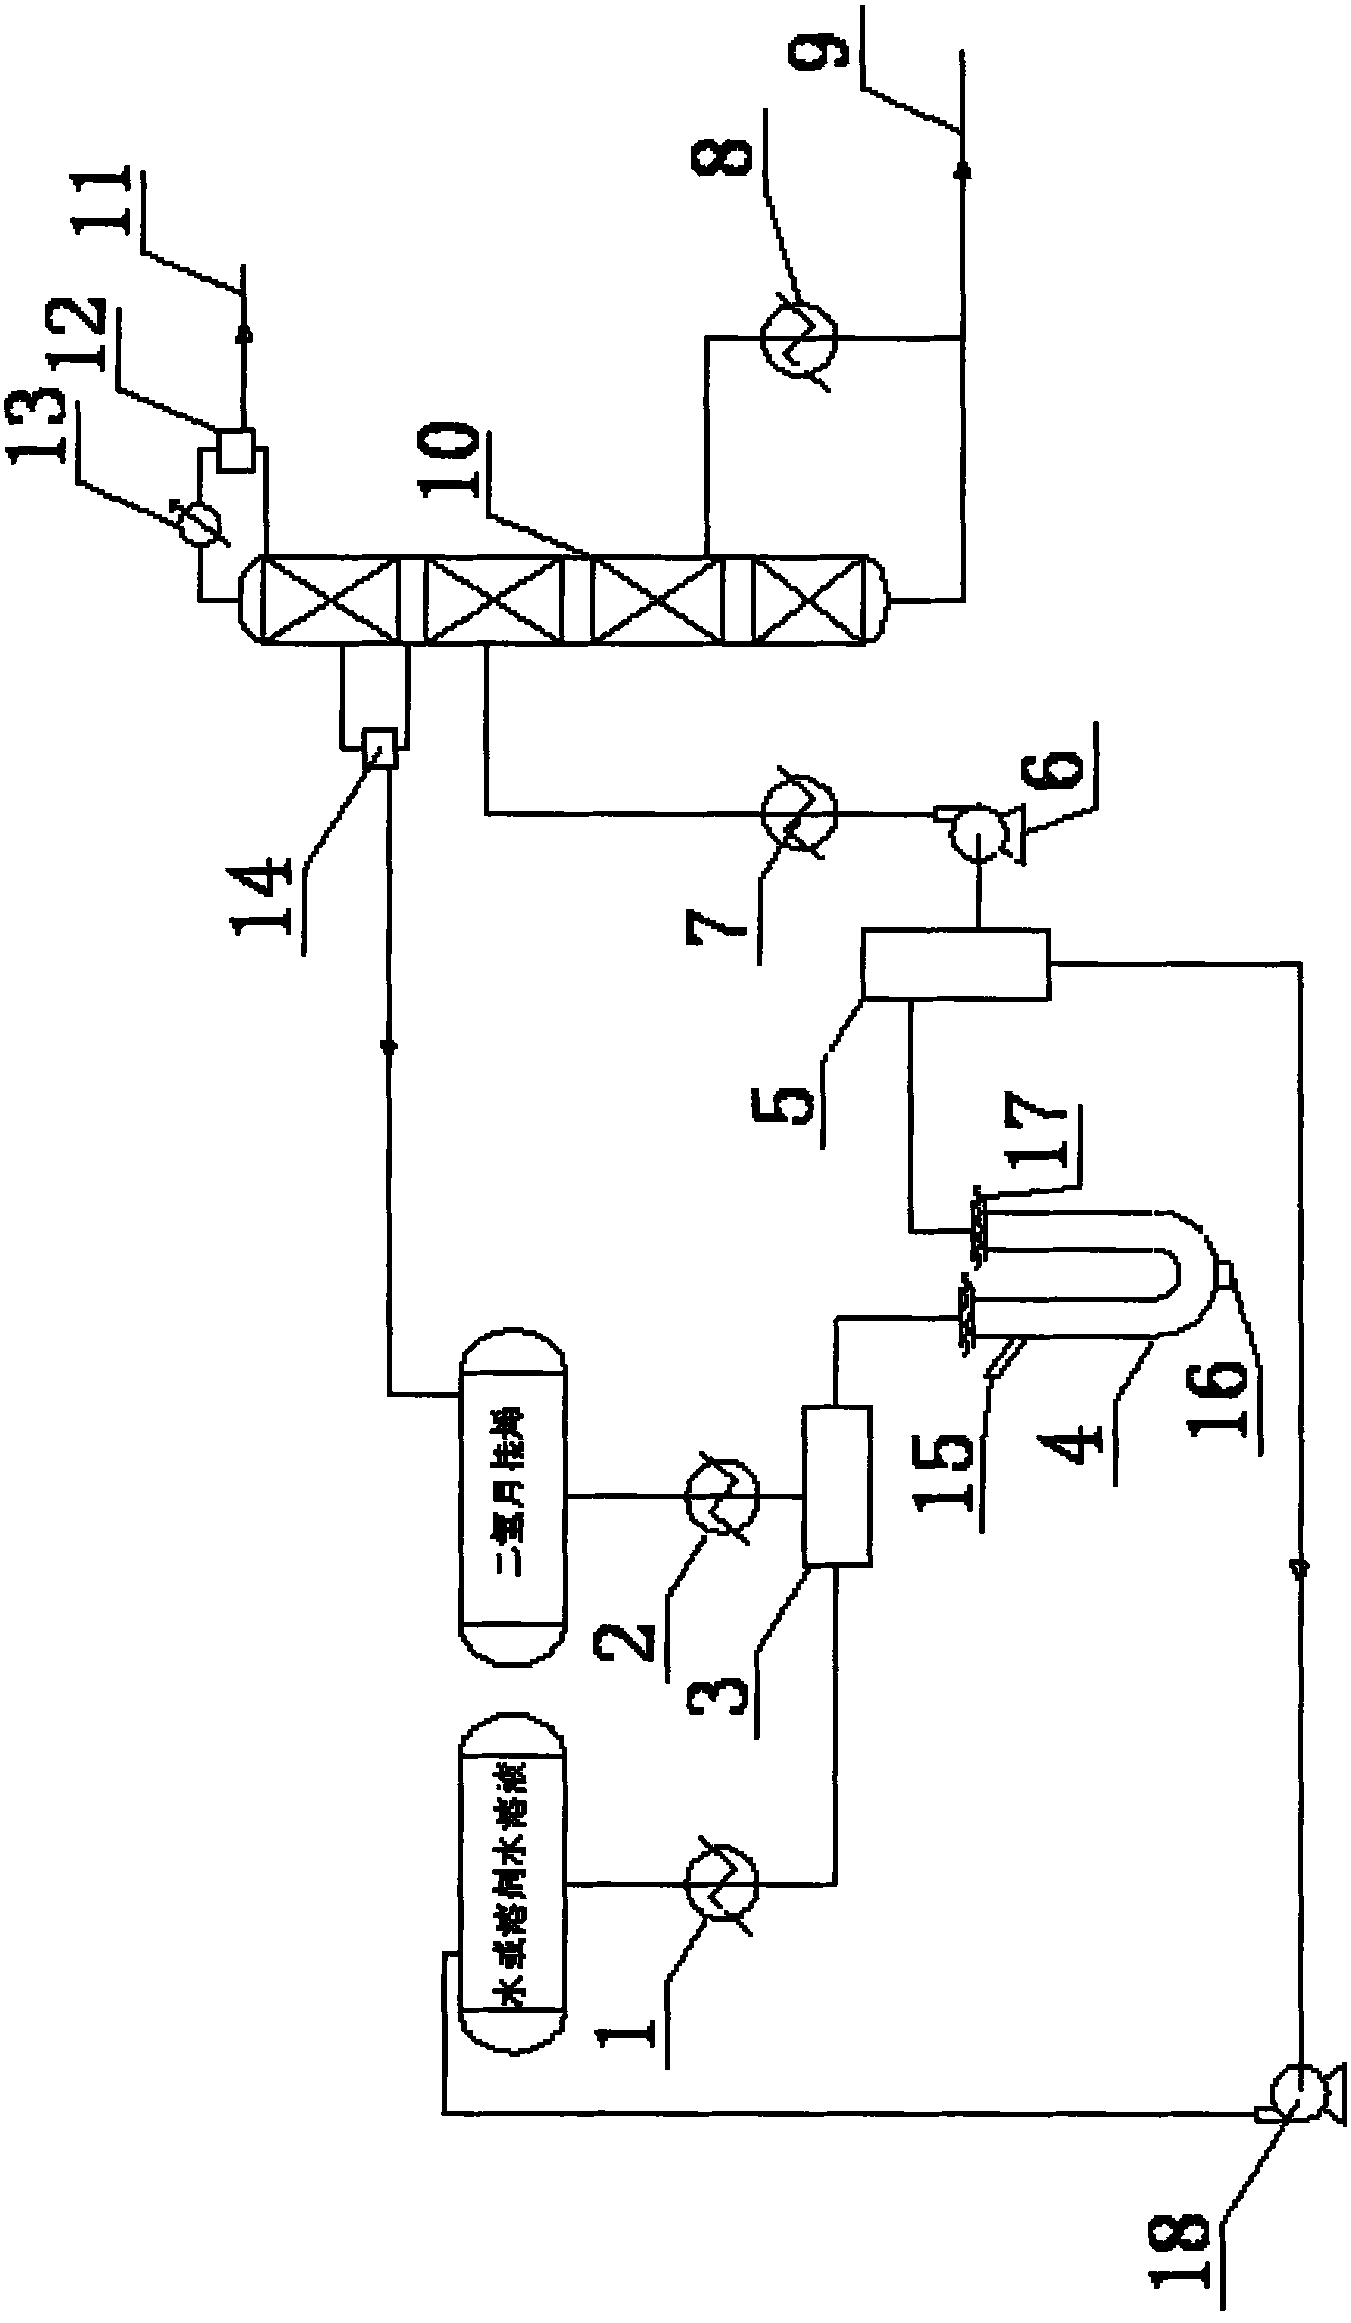 Dihydromyrcenol fixed bed hydration continuous production method